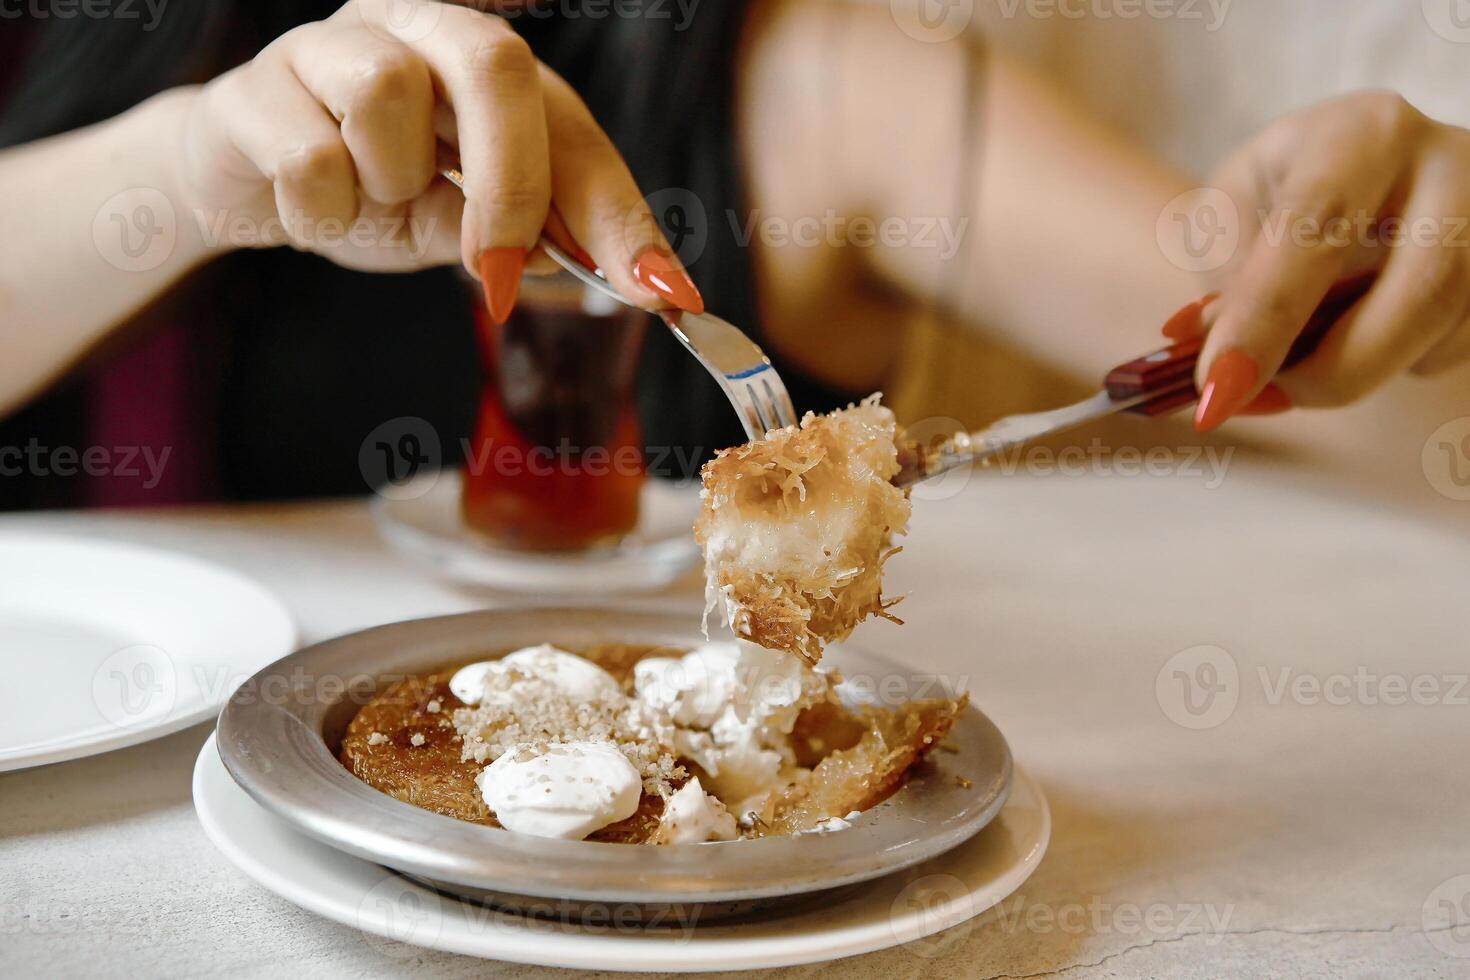 Woman Eating a Slice of Pie With a Fork photo